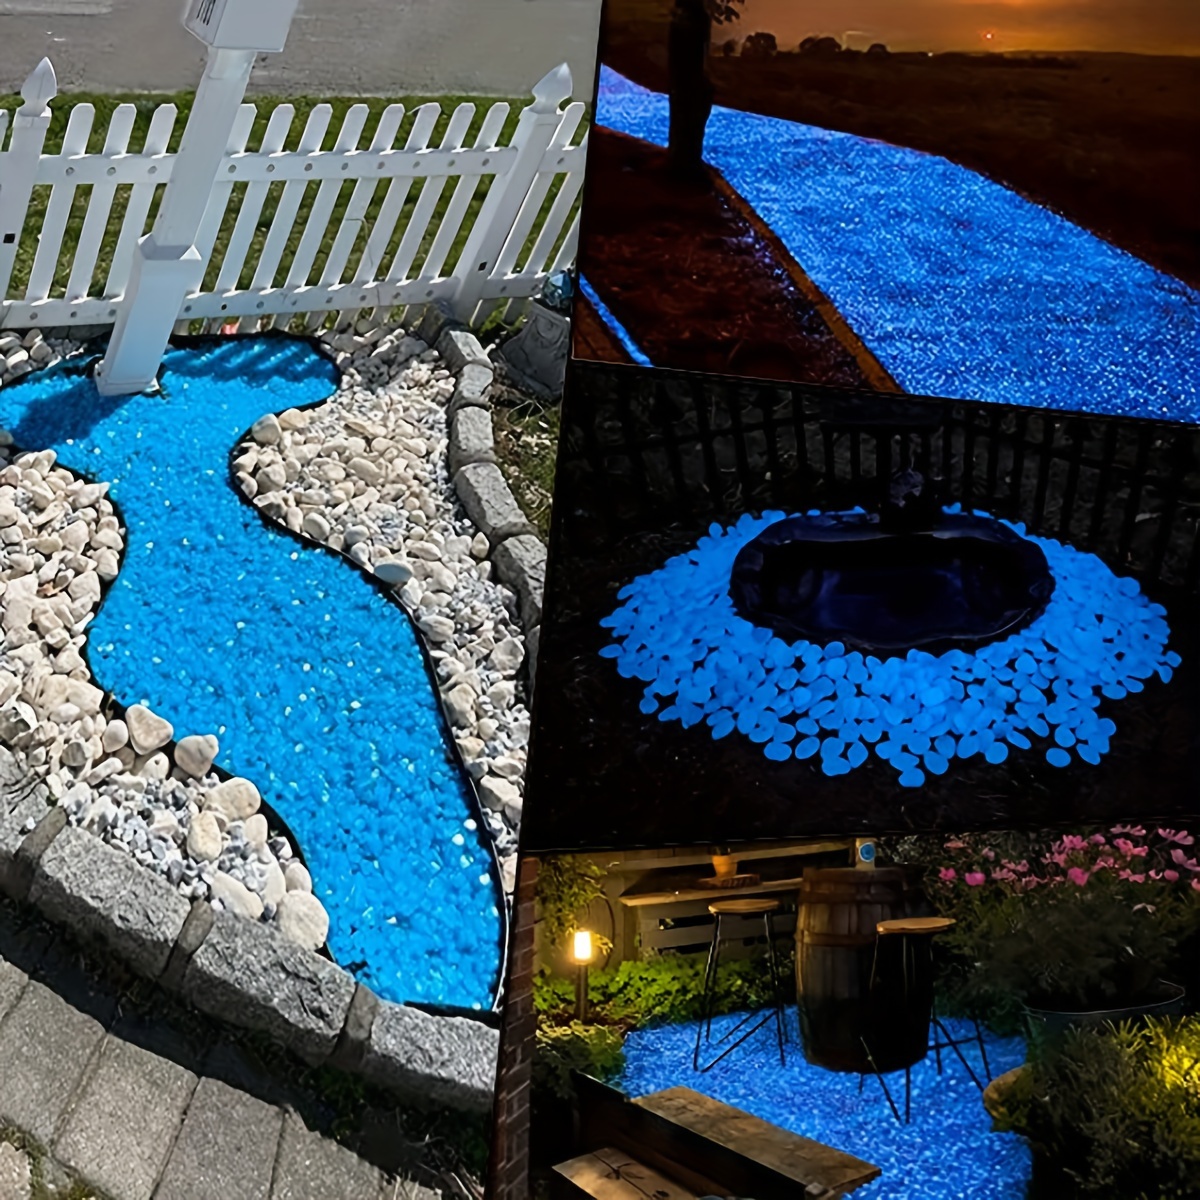 

200 Pack Resin Glow In The Dark Pebbles For Outdoor Decor, Garden Lawn Stones, Aquarium, Walkways, Fish Tank, Pathway, Solar Or Light Charged, Reusable Luminous Gravel, Multi-colored